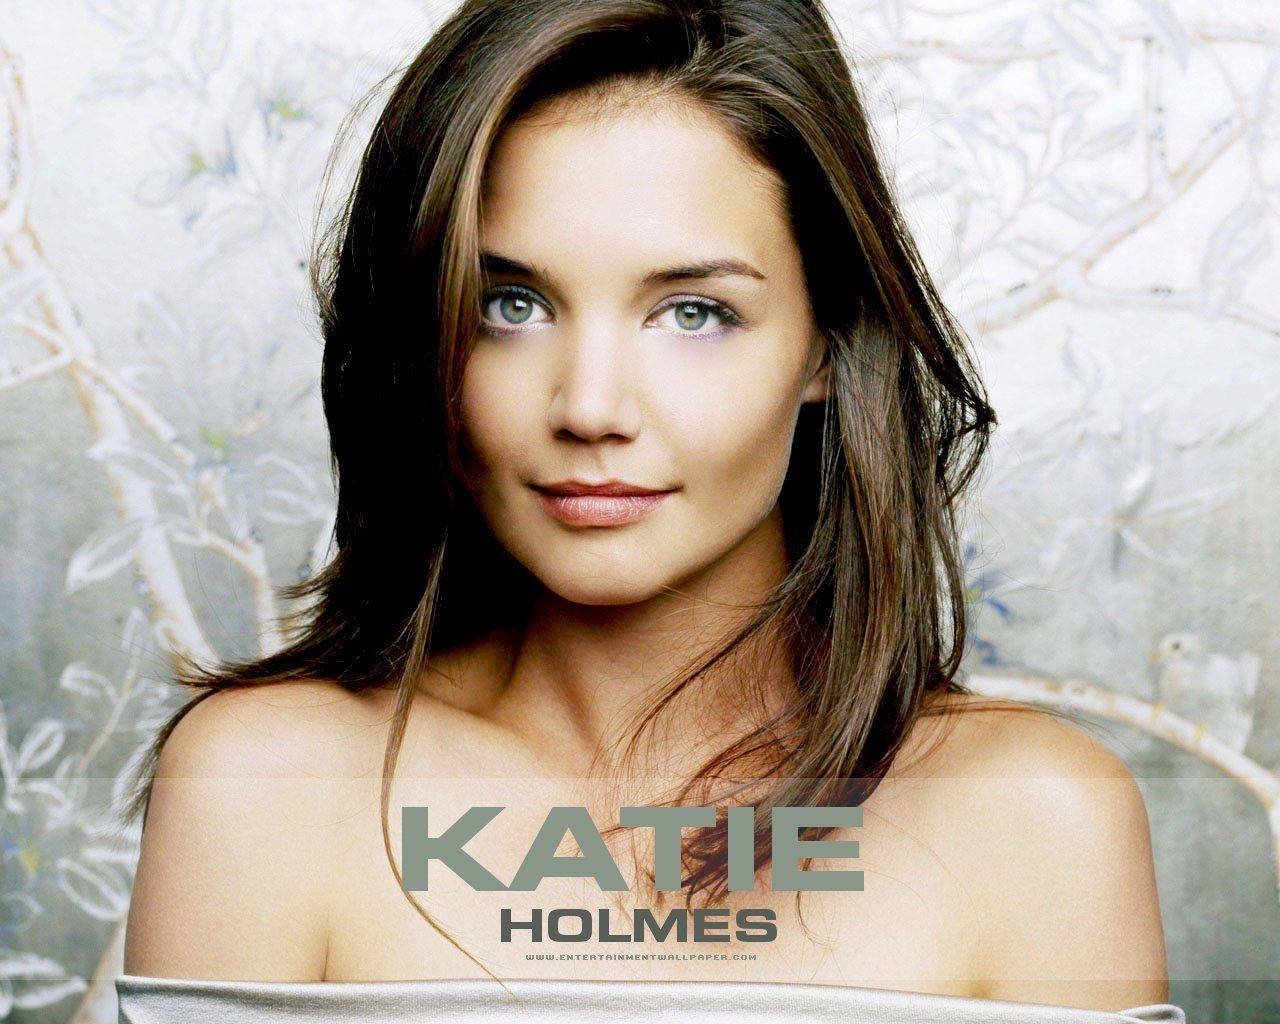 Actress And Model Katie Holmes Photoshoot Wallpaper